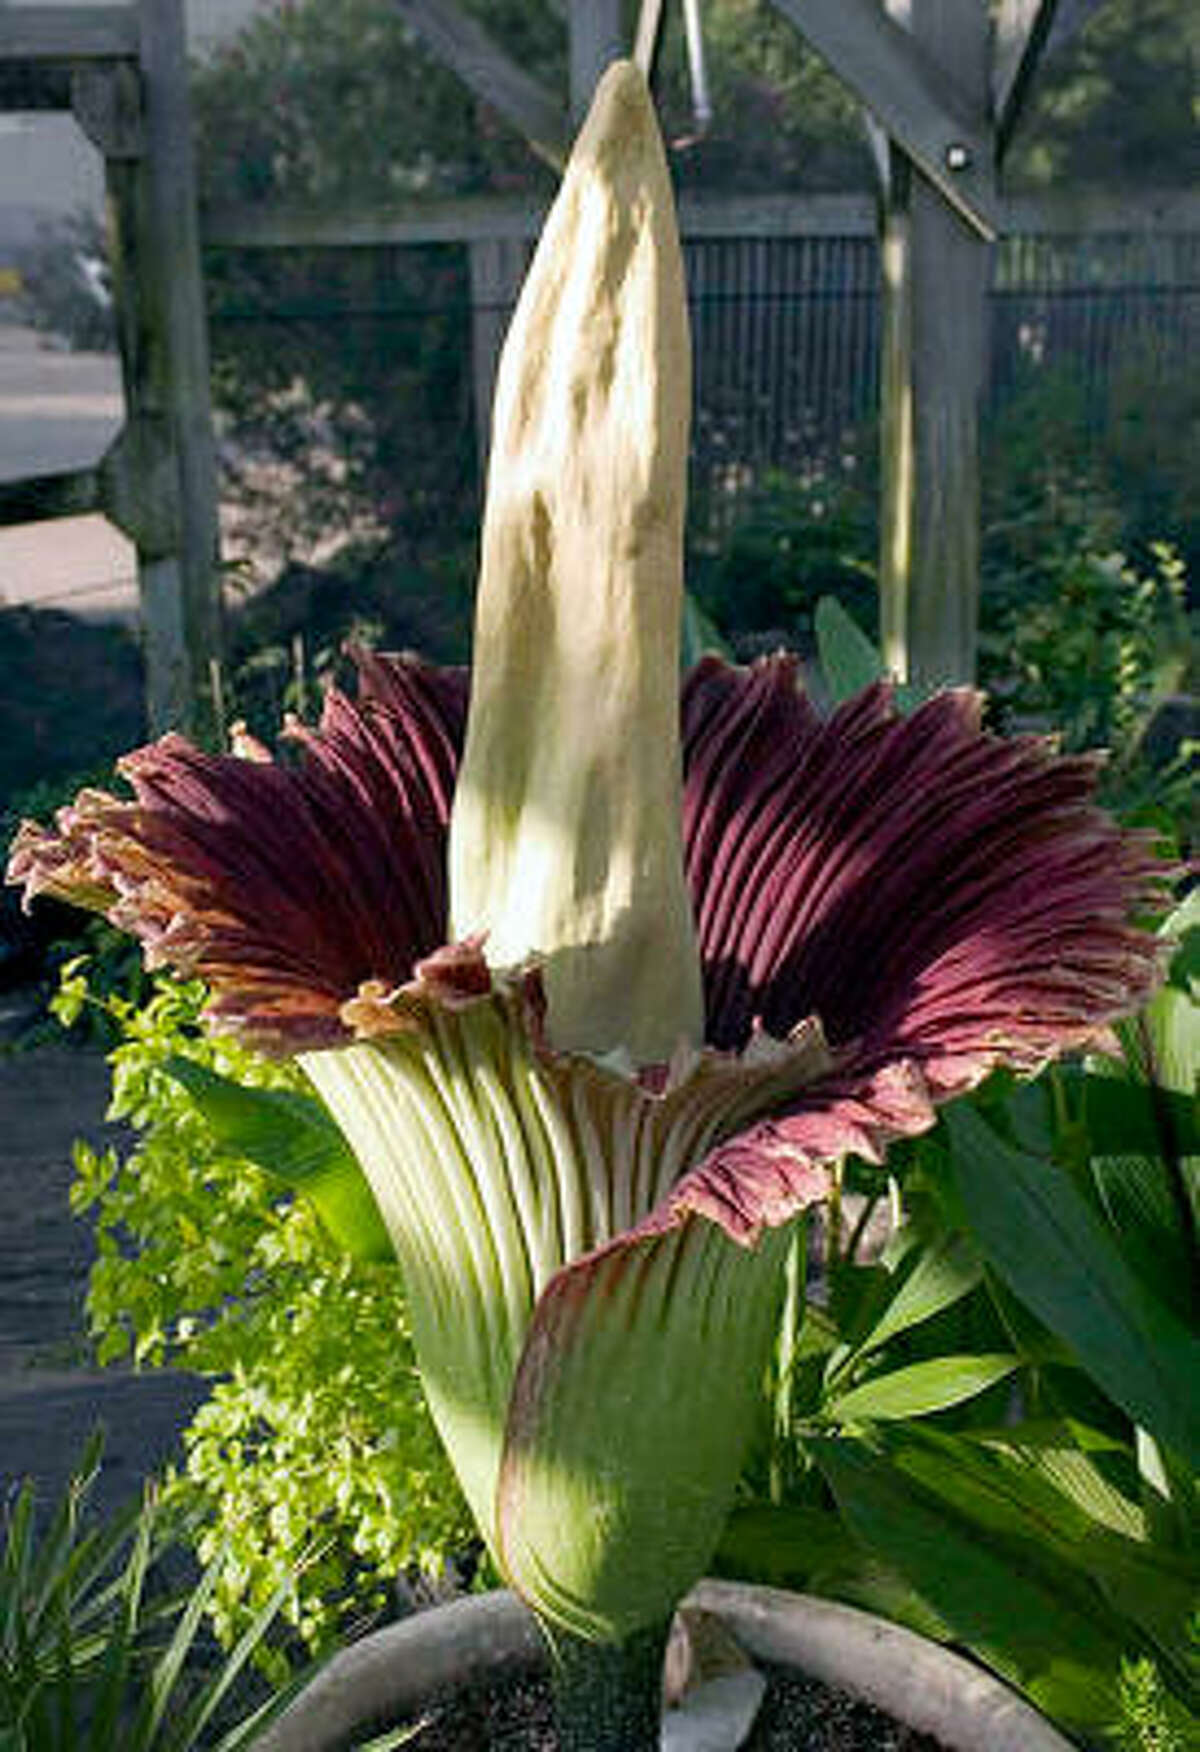 A 61-inch corpse flower at Stephen F. Austin State University's Mast Arboretum in Nacogdoches was the only other Amorphophallus titanum to bloom in Texas.